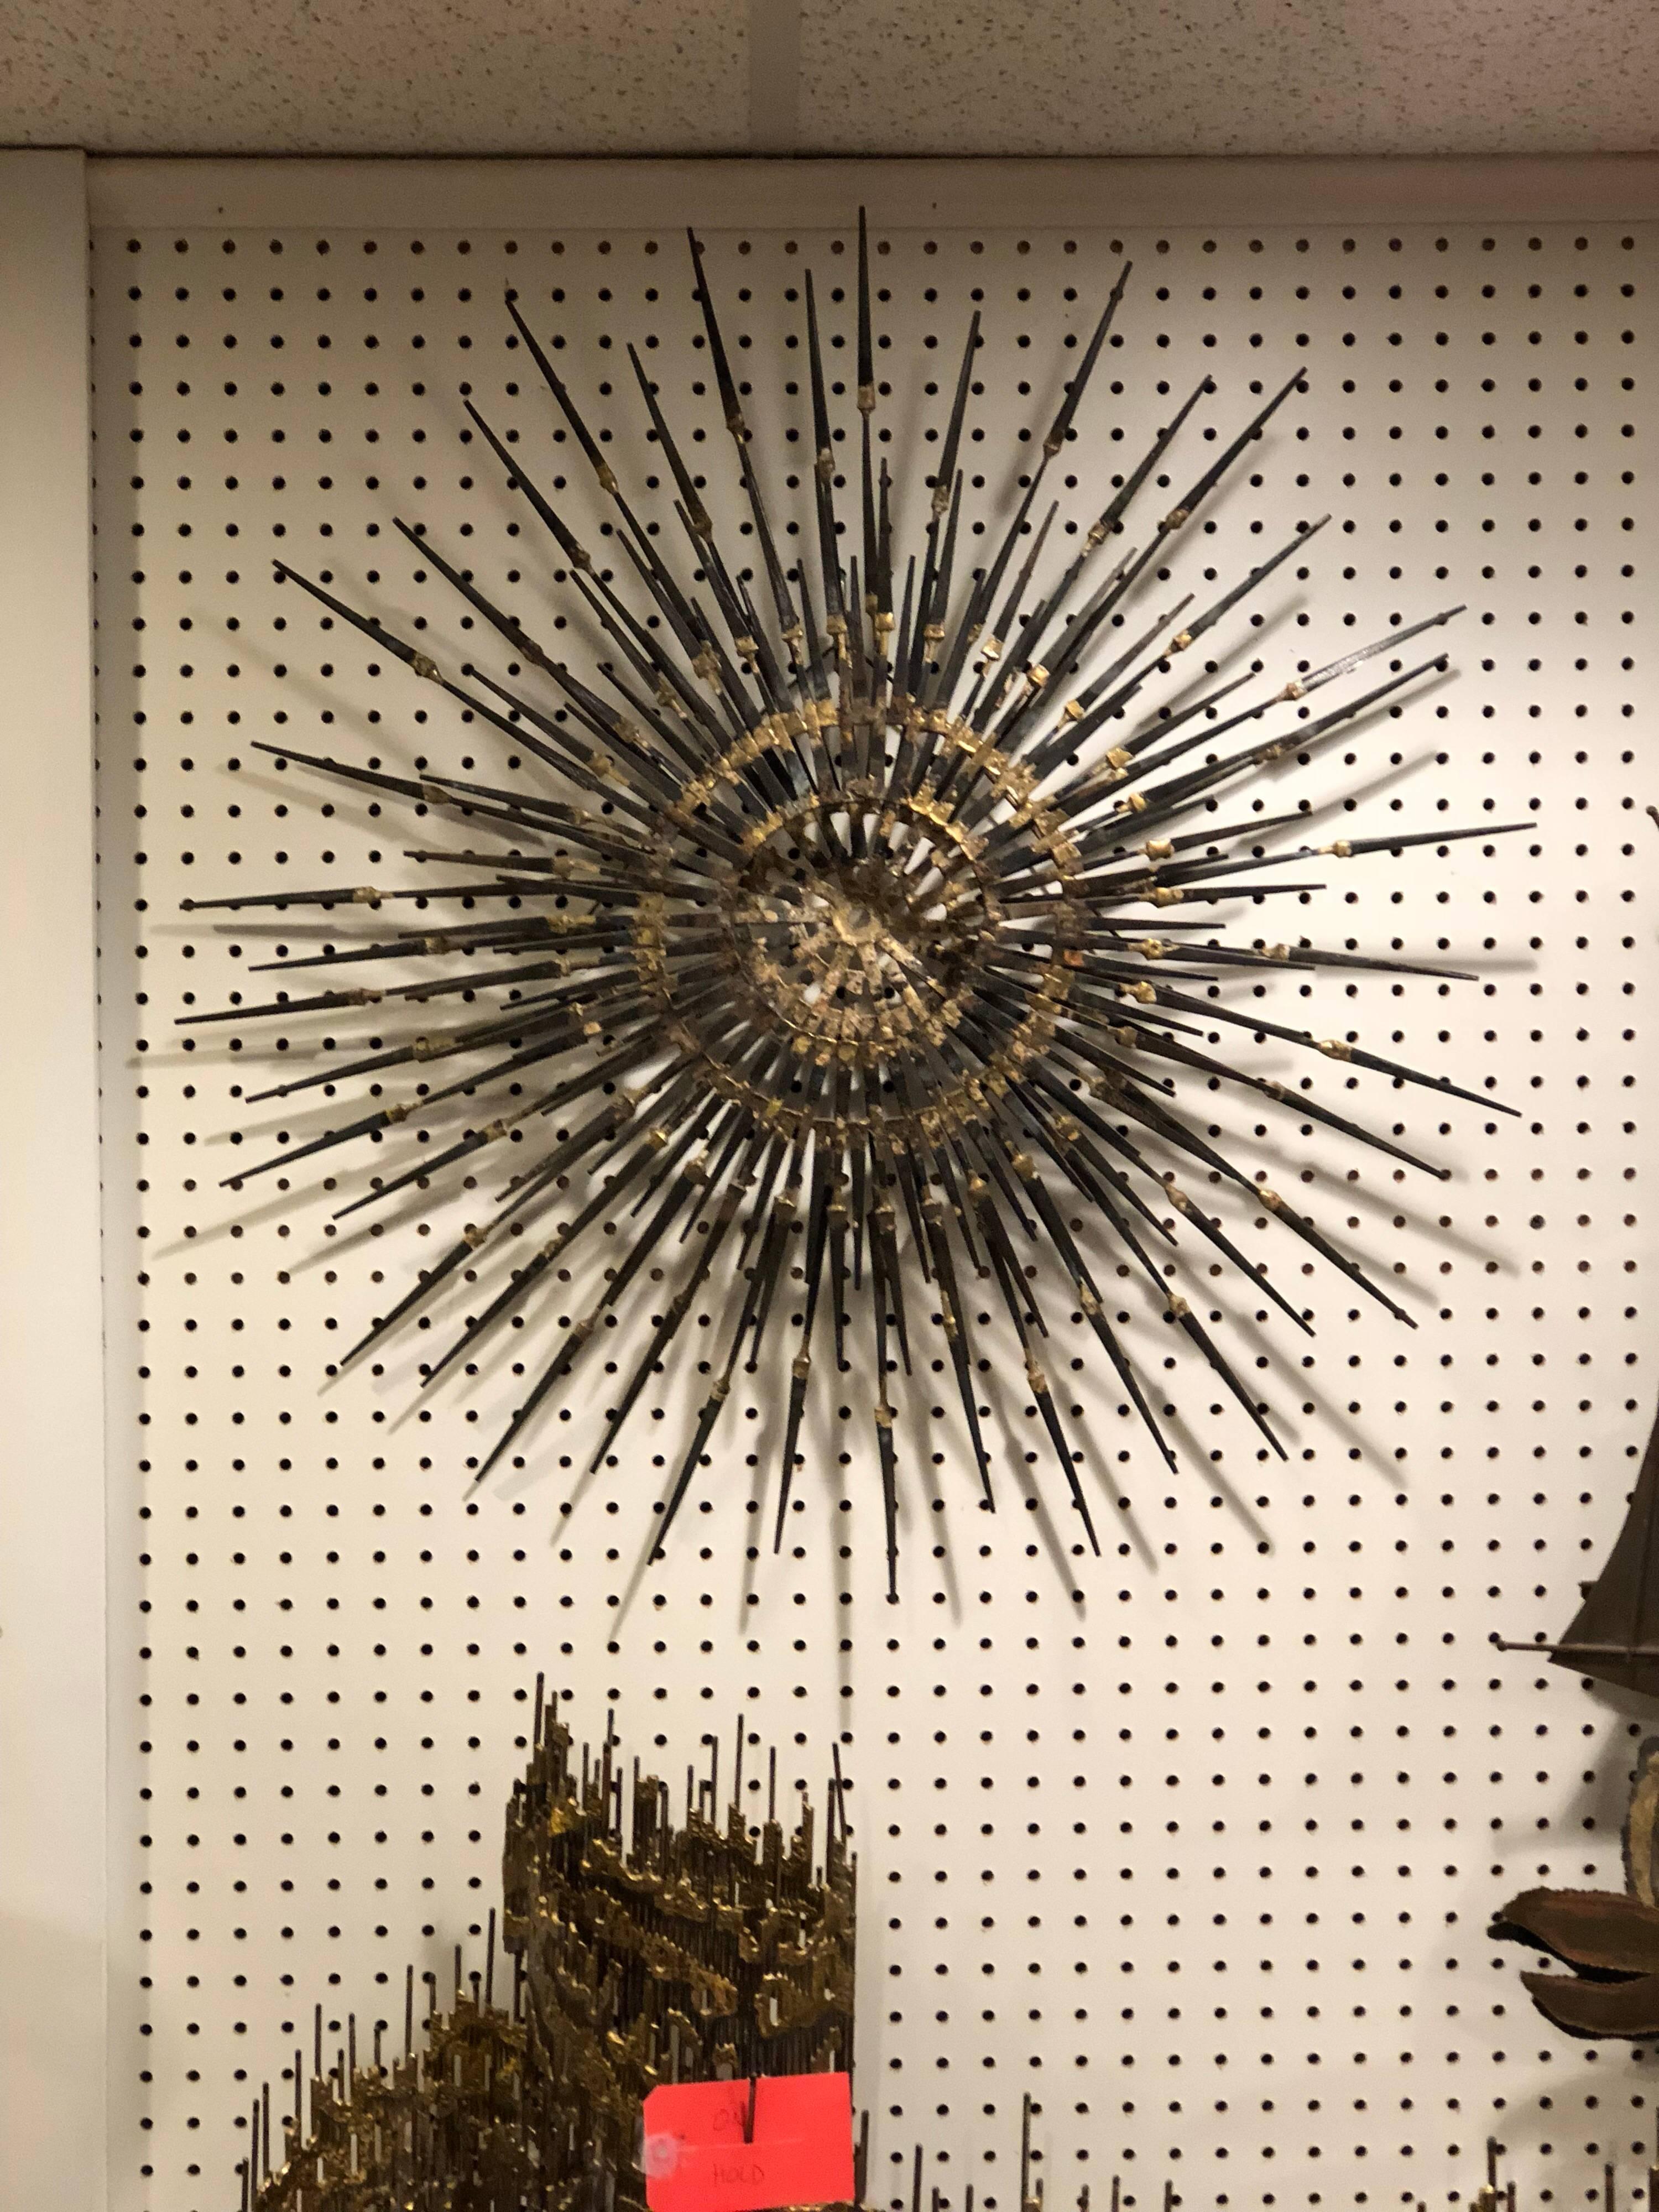 Signed Mid-Century Modern starburst sculpture by Santora. Handmade nail sculpture with gilt accents.
Measures: 30 x 30 x 3 deep. Please request a parcel quote from 1stdibs as it will be cheaper than their white glove quote. This item should ship via